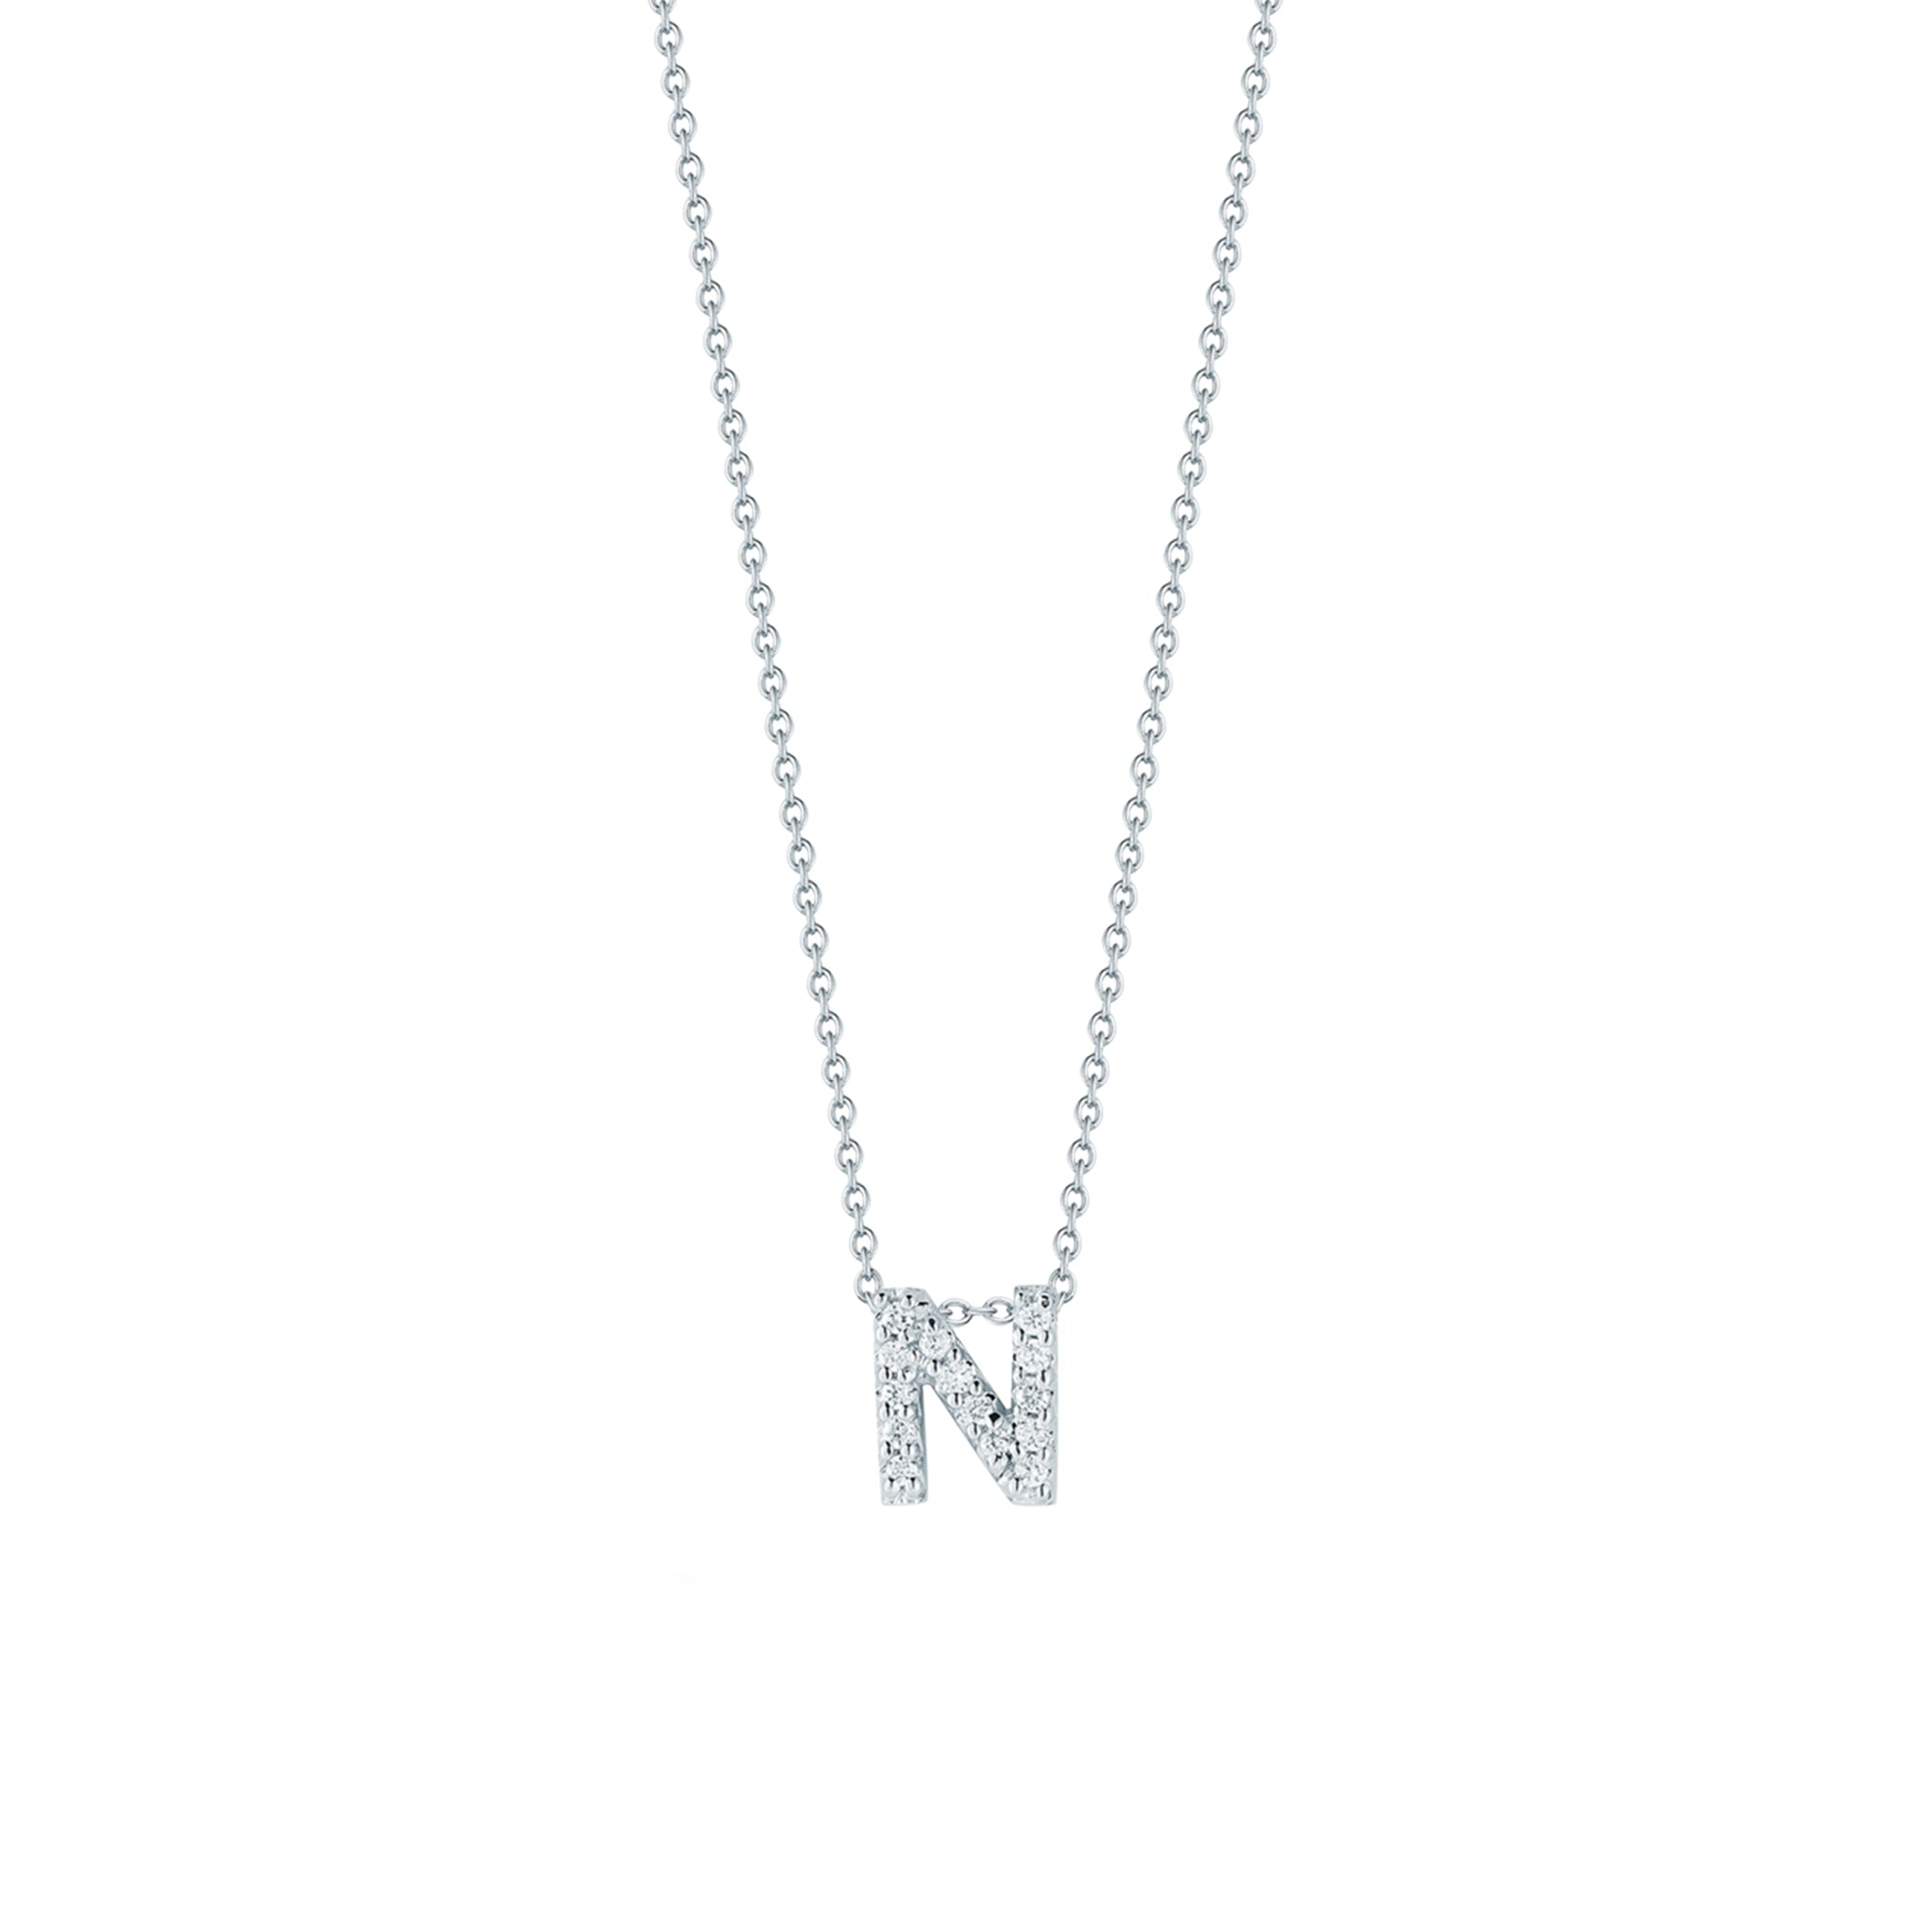 Roberto Coin 16-18" love letter diamond "N" necklace, additional letters available - Be On Park